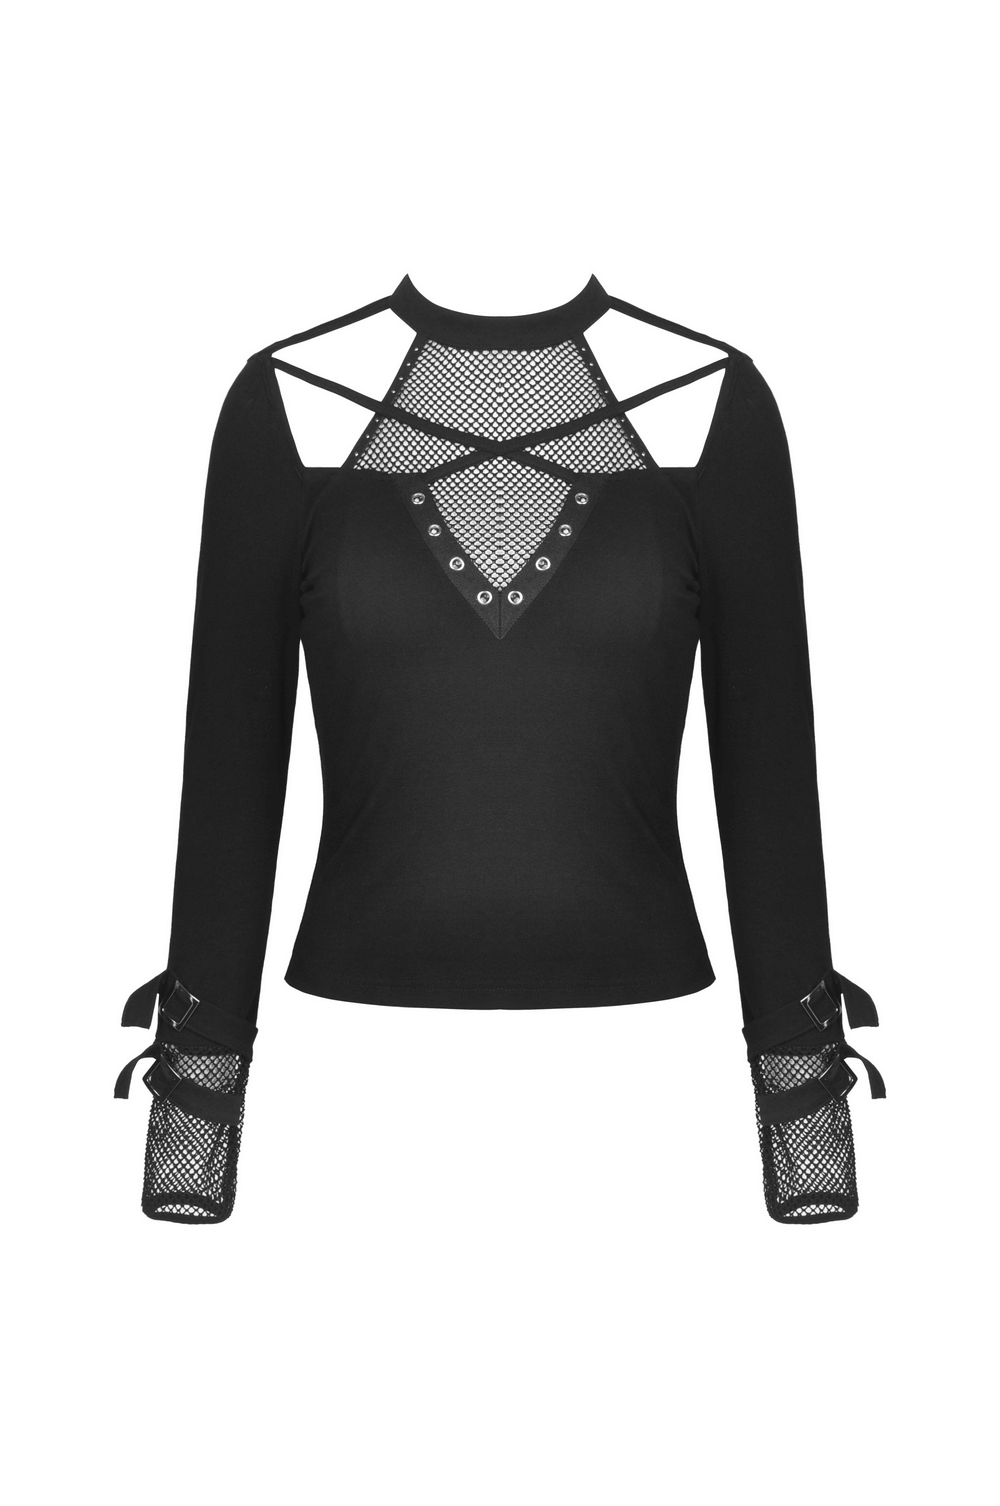 Edgy Black Cut-Out Mesh-Panel Top with Stud Details